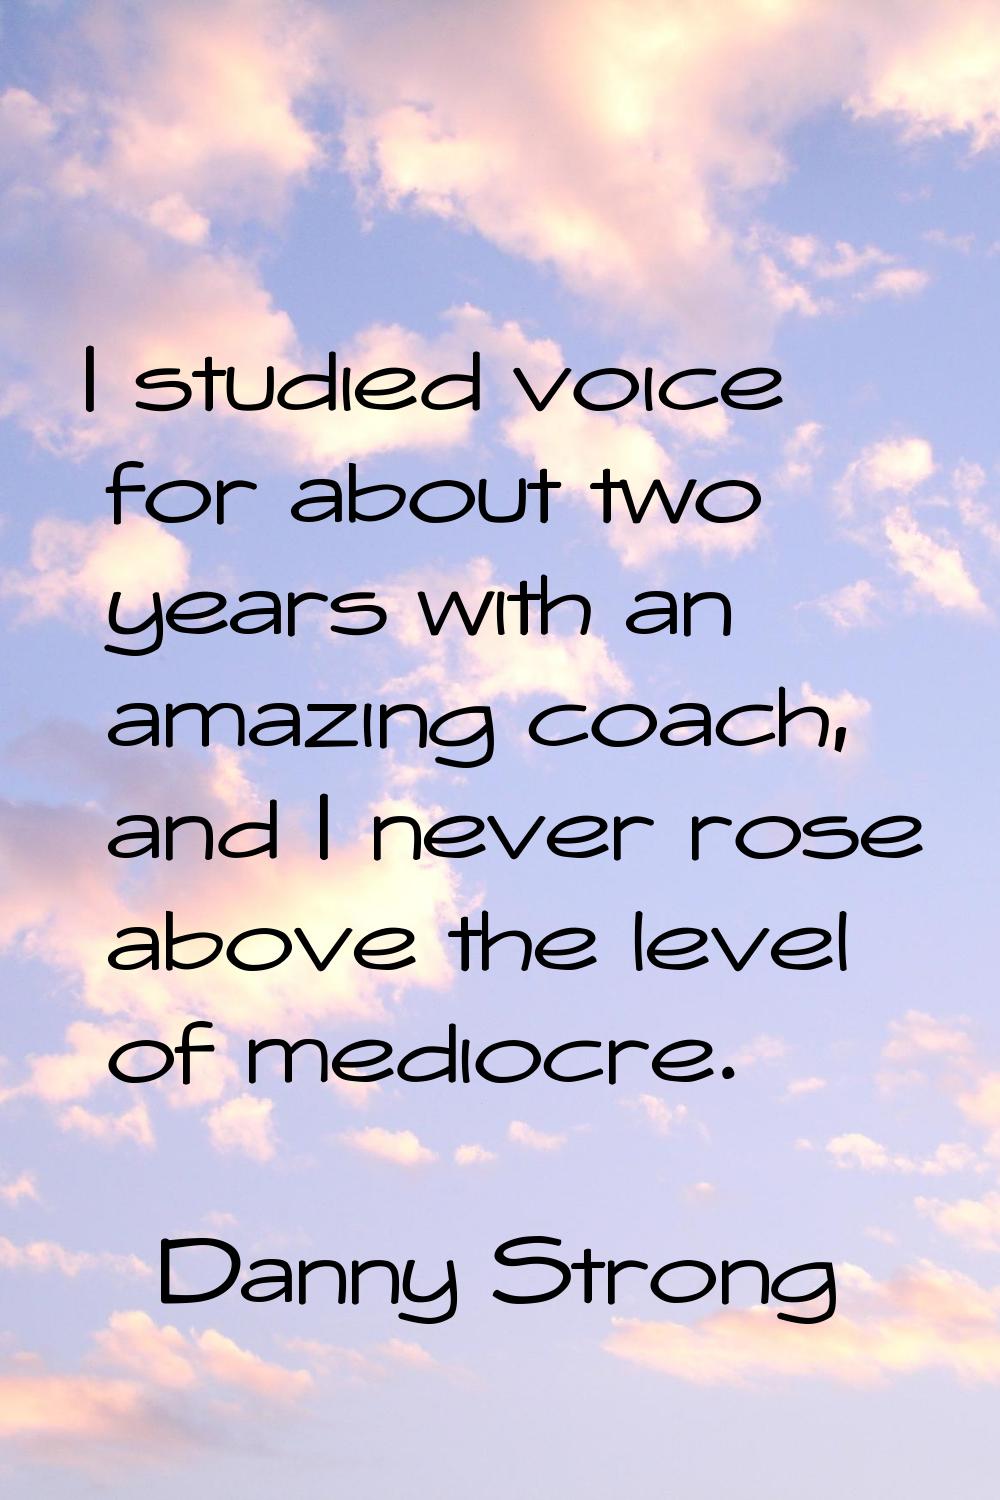 I studied voice for about two years with an amazing coach, and I never rose above the level of medi